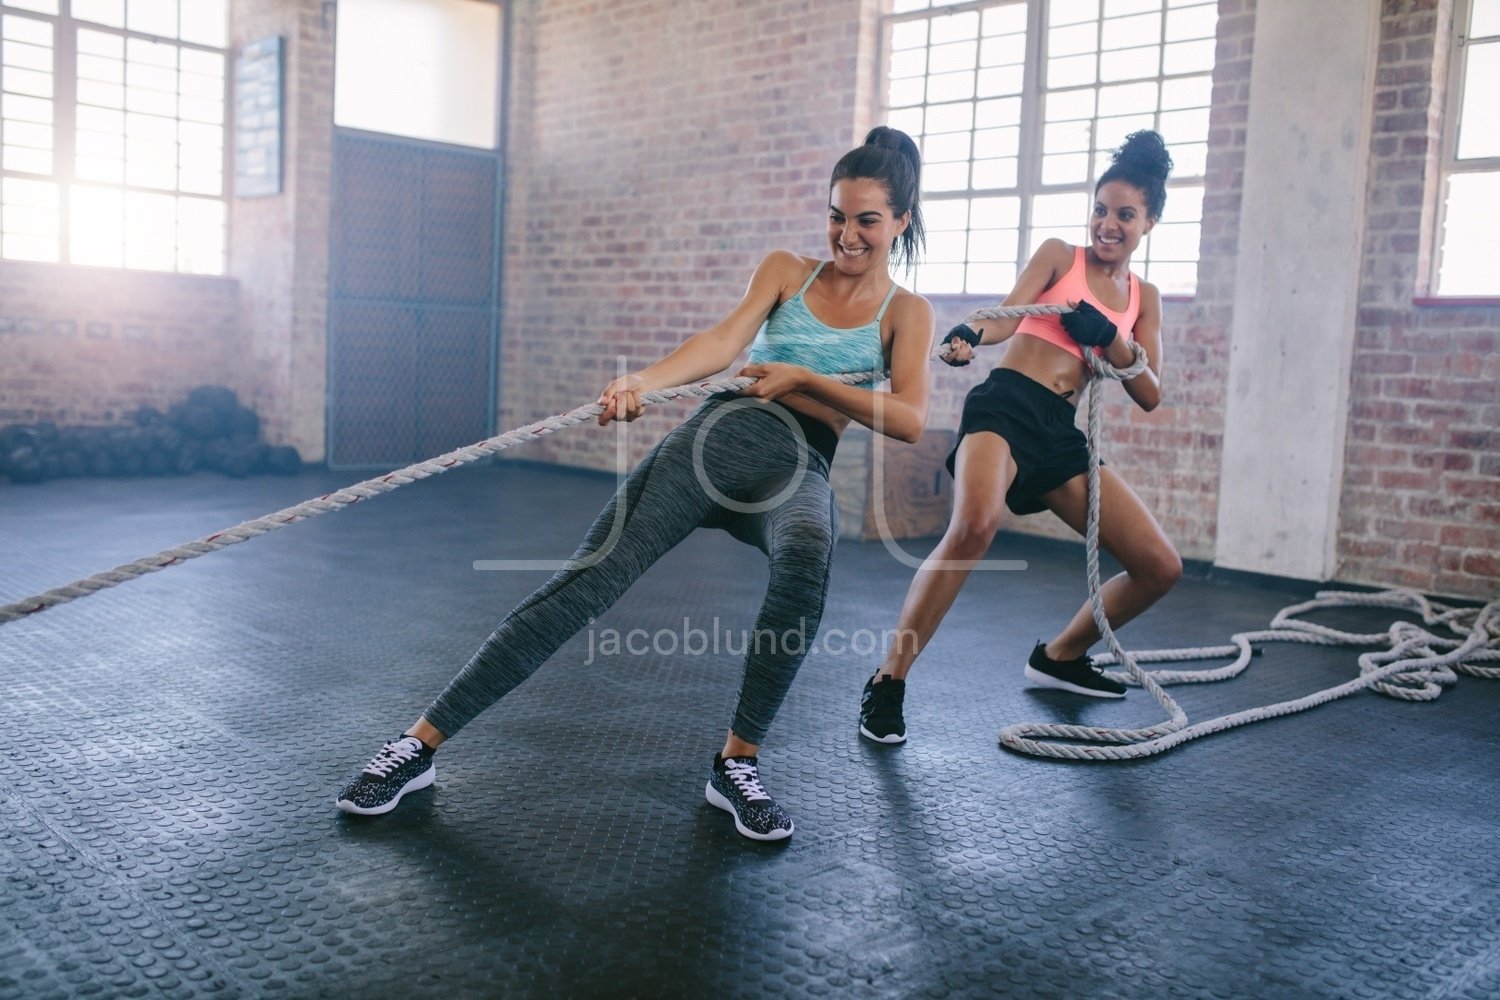 Young women doing rope pulling exercises at a gym – Jacob Lund Photography  Store- premium stock photo